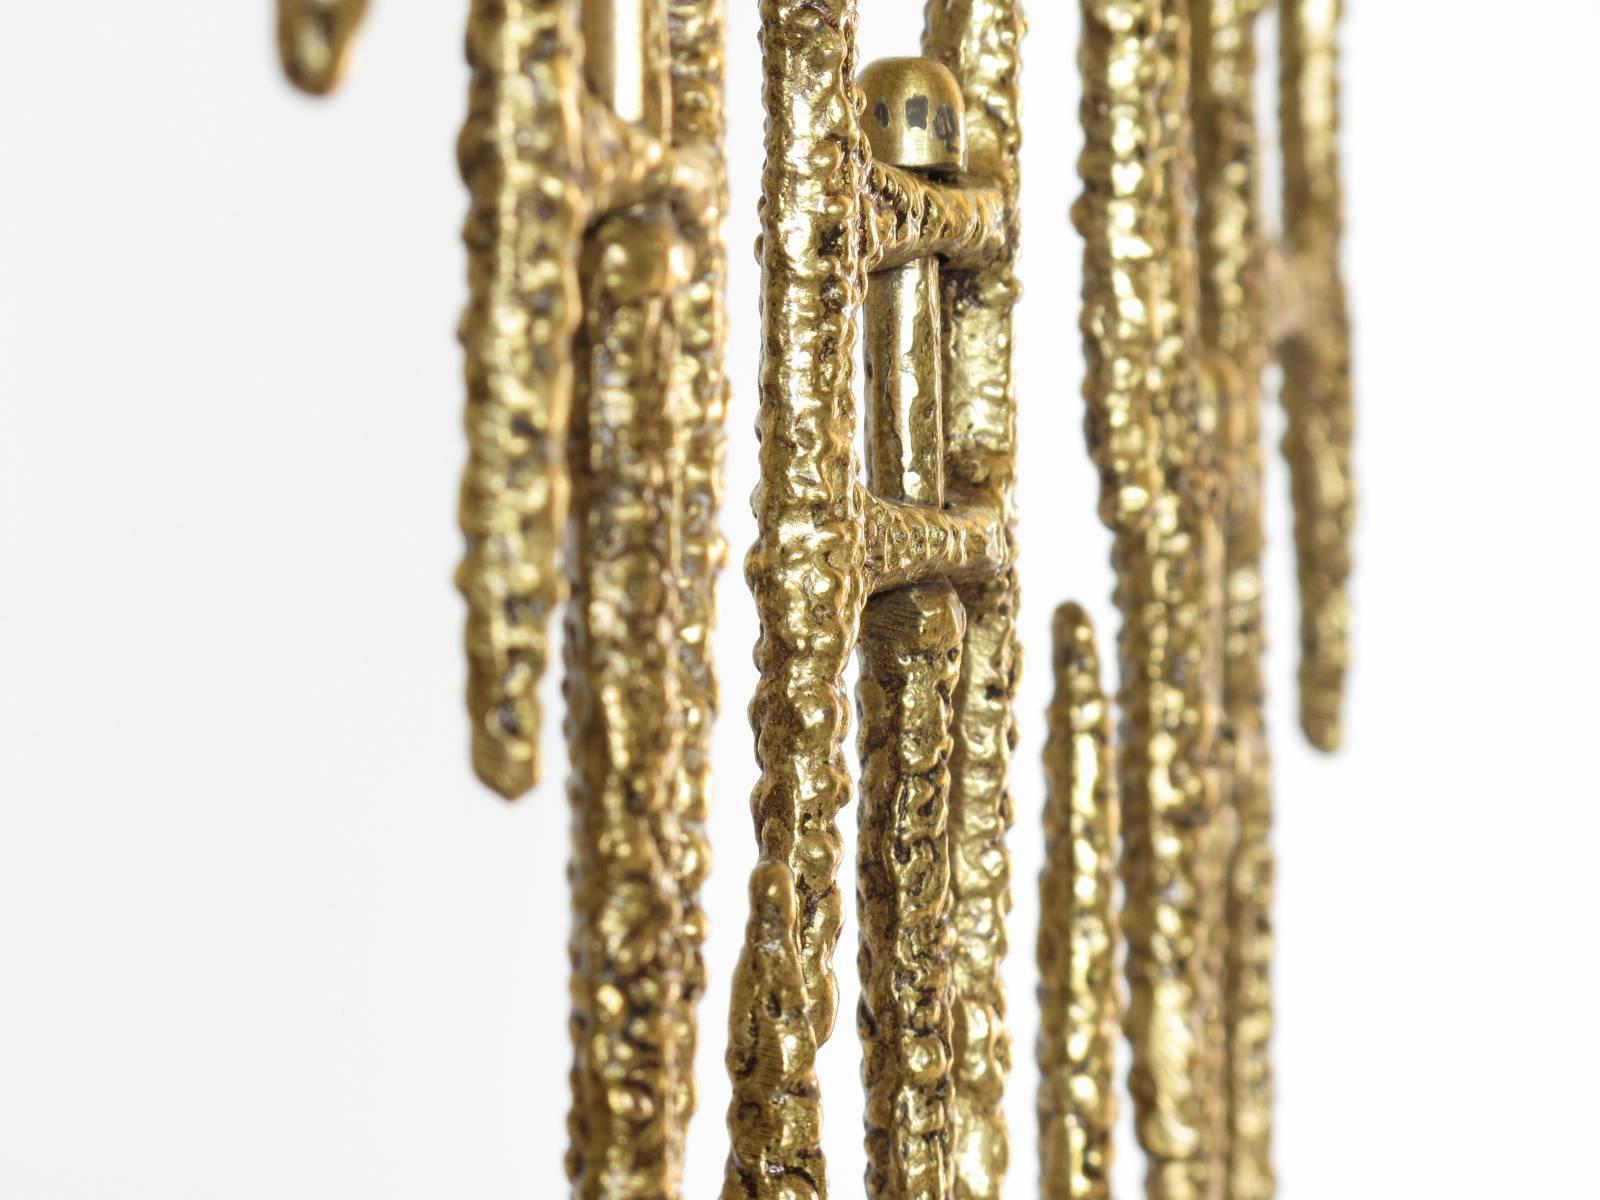 Hand-Crafted Decorative Brutalist Style Brass Menorah, Handmade in Israel, 1970s For Sale